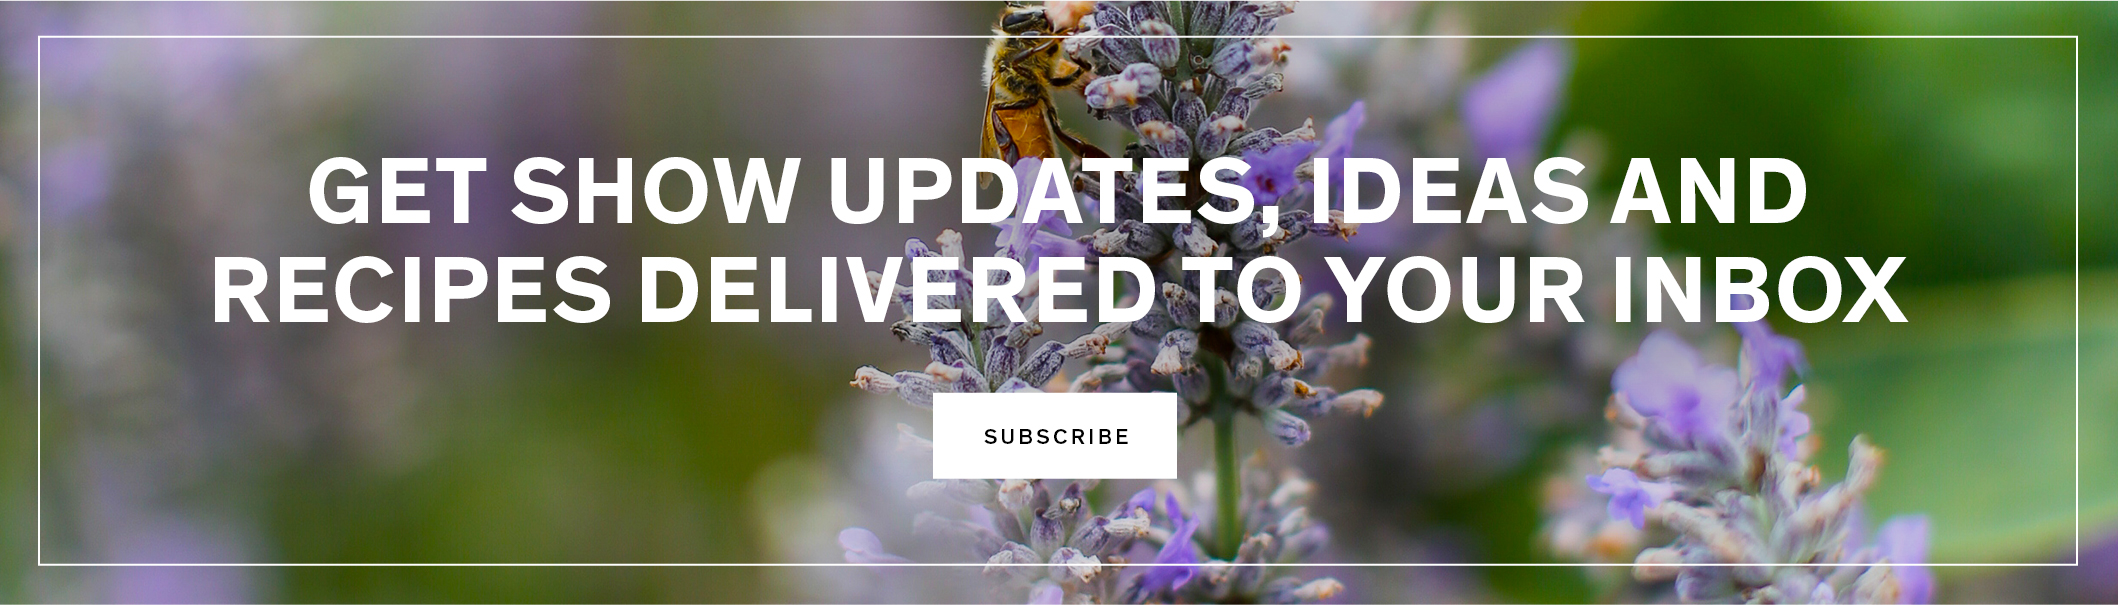 Get show updates, ideas and recipes delivered to your inbox.